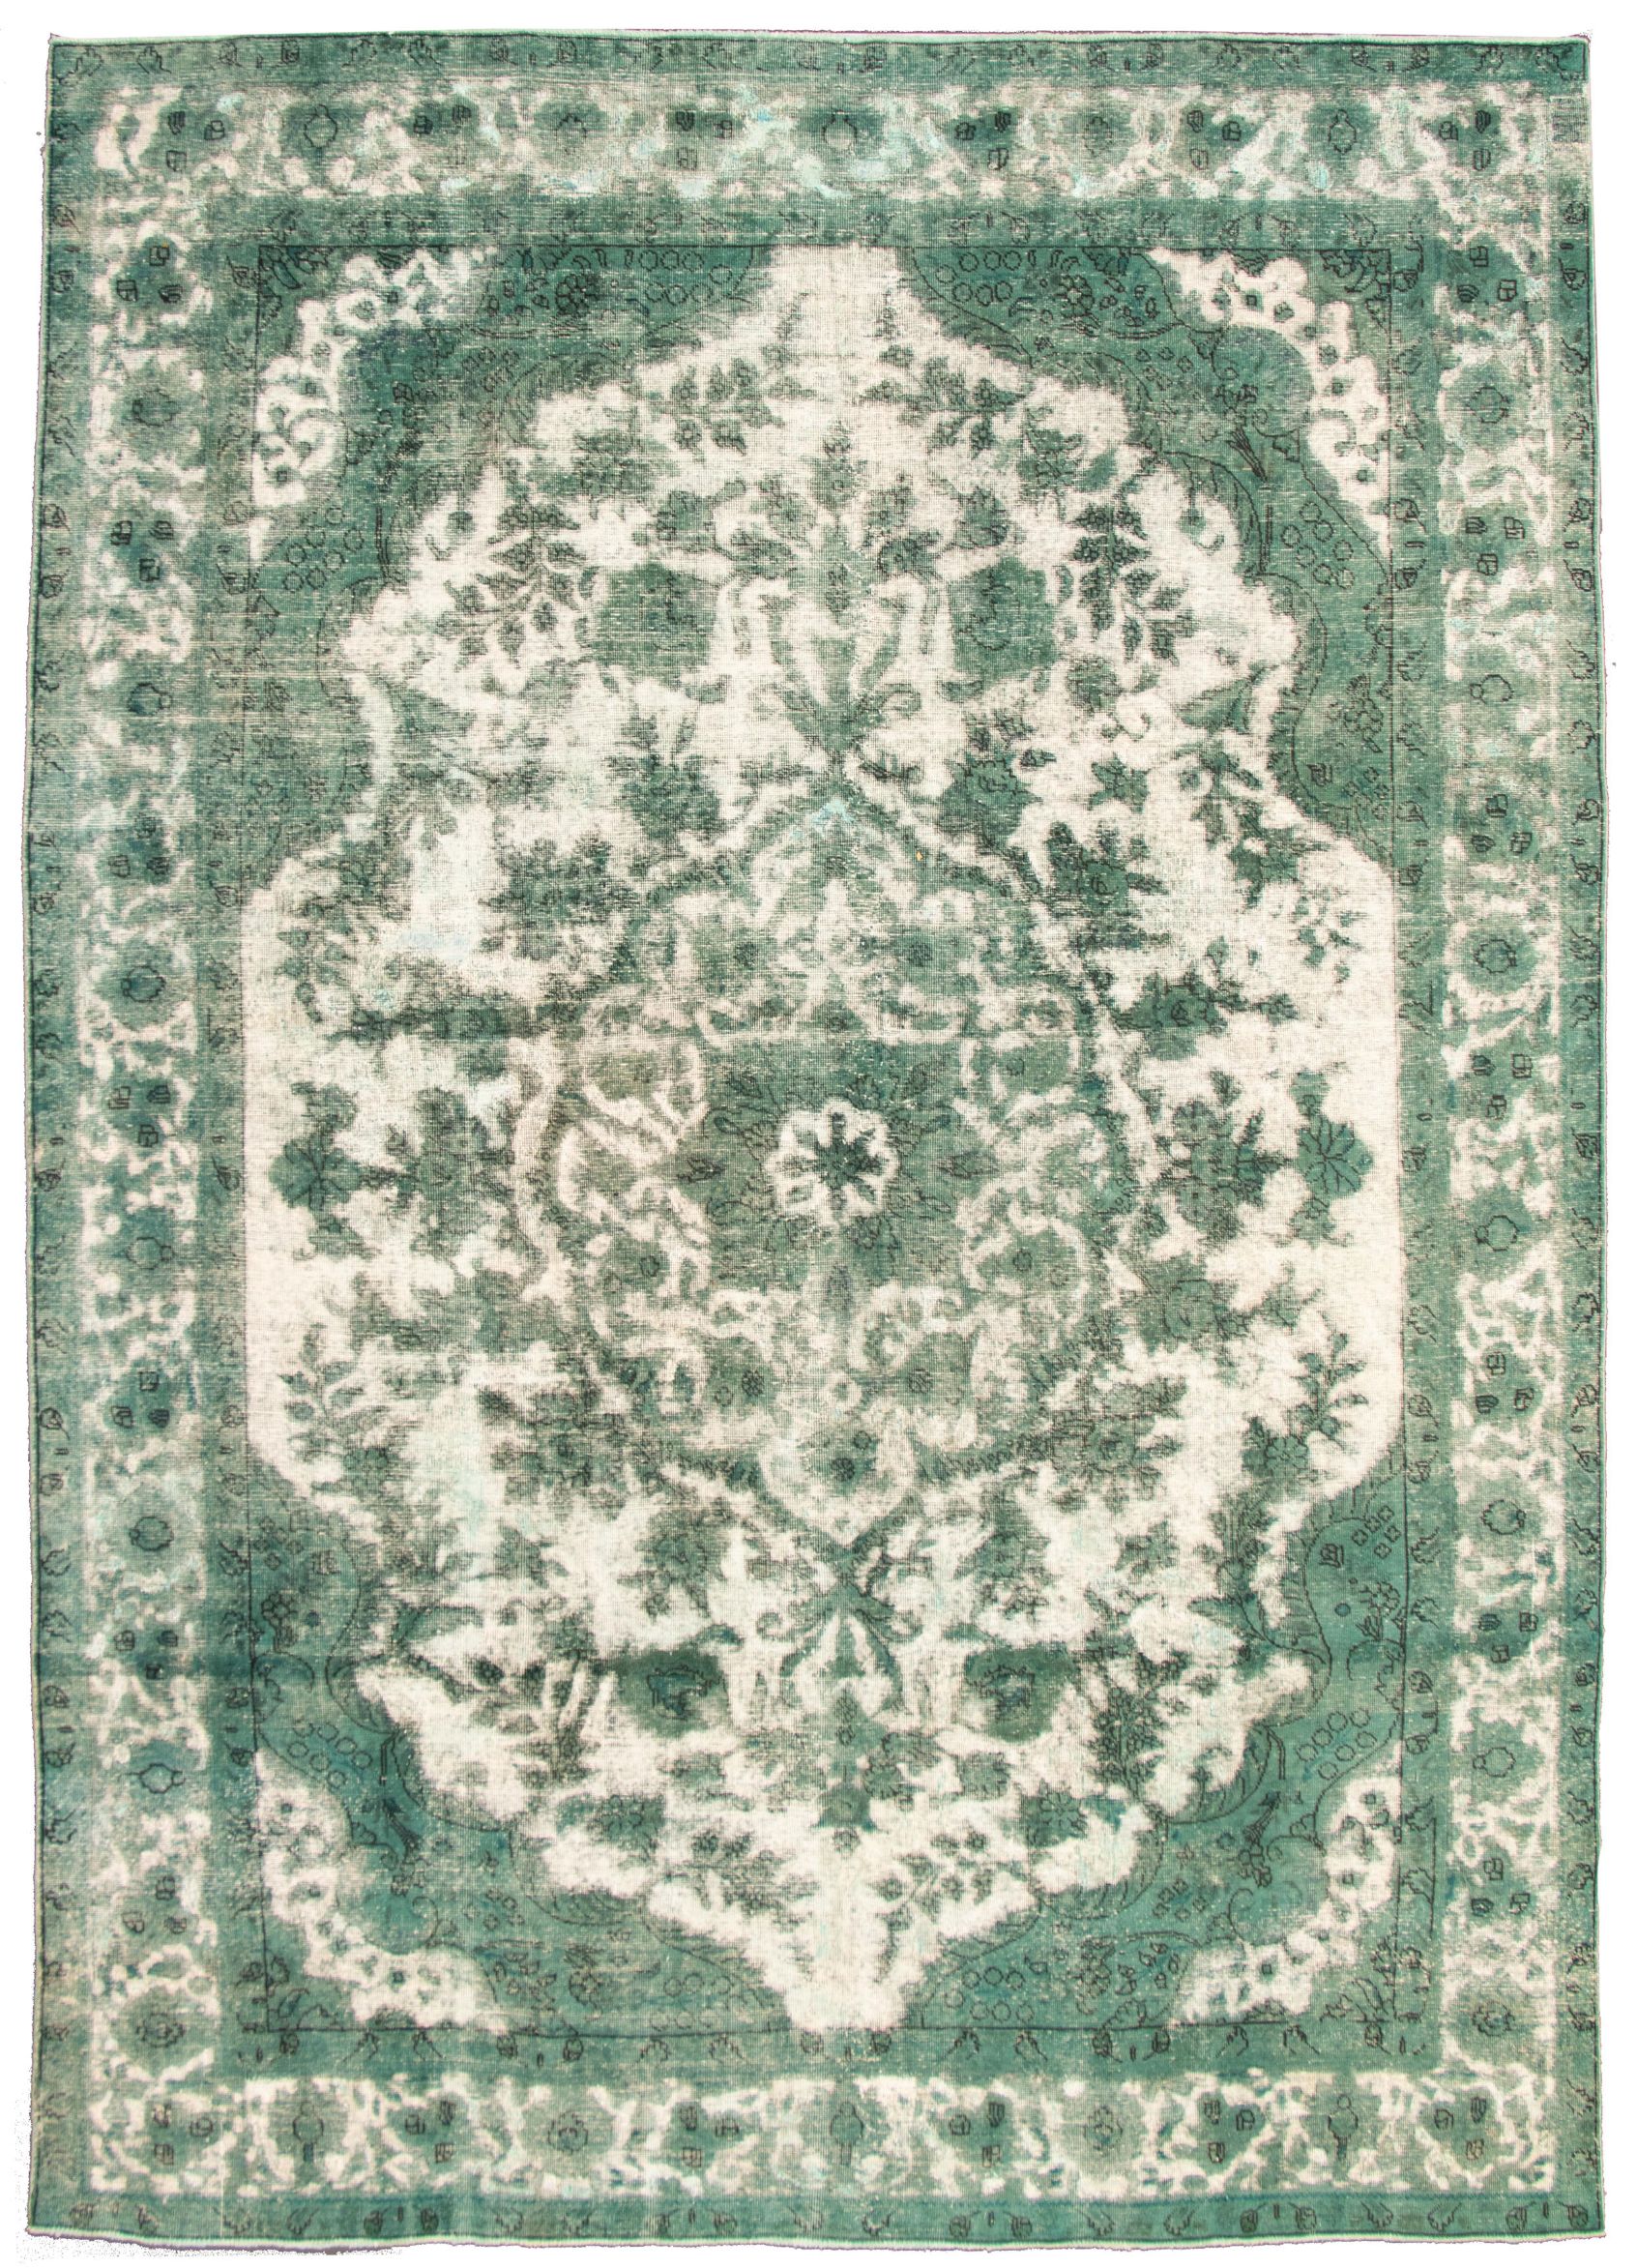 Hand-knotted Color Transition Teal Wool Rug 9'2" x 12'9" Size: 9'2" x 12'9"  